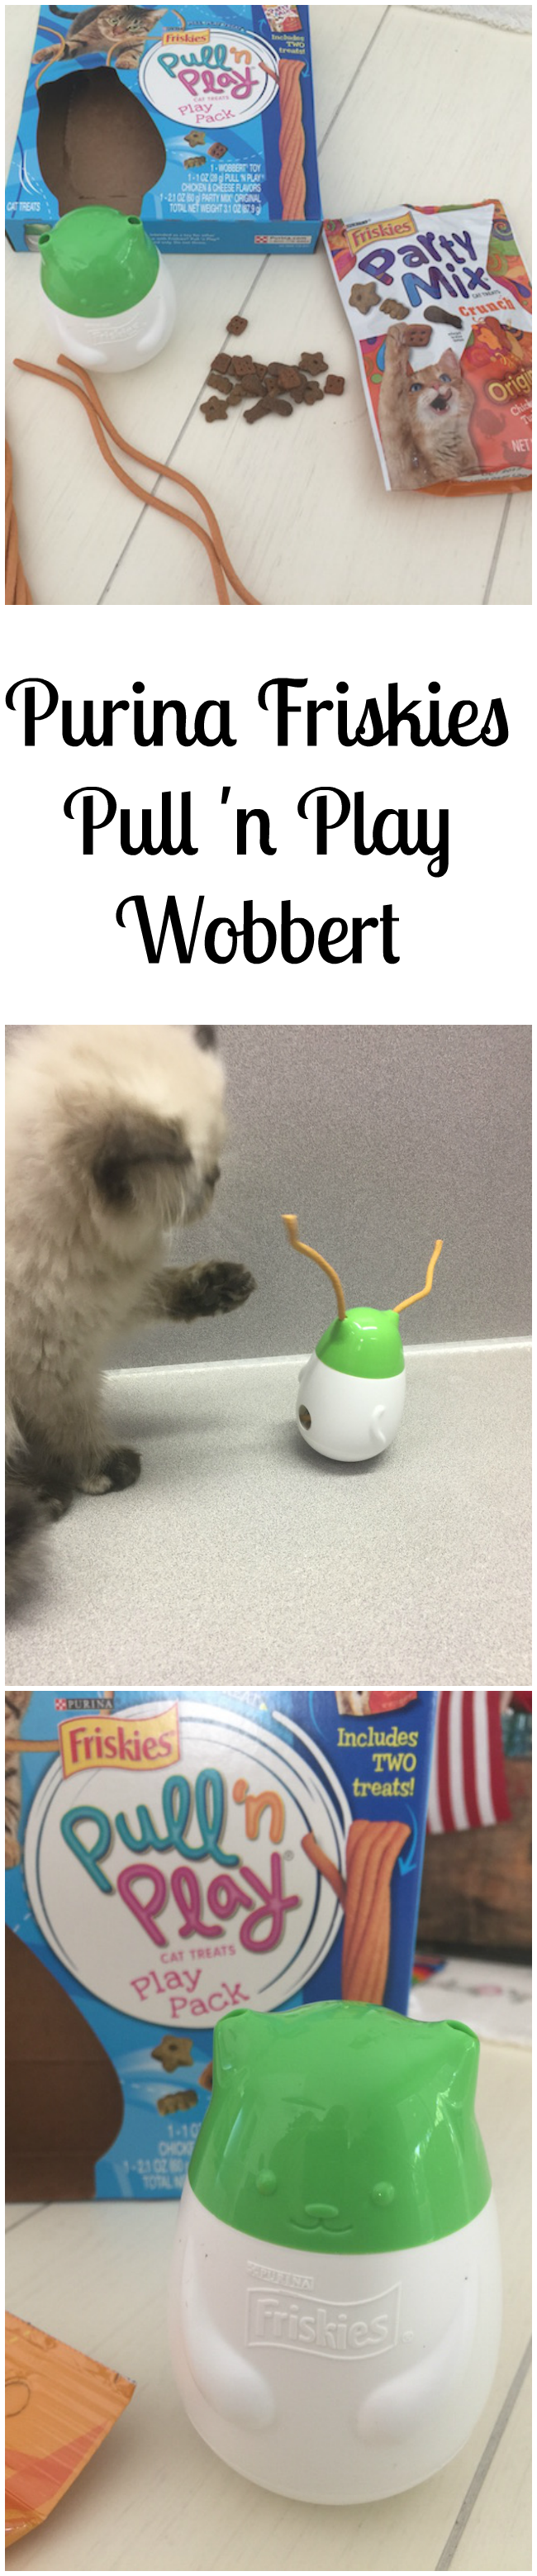 Wobbert is a wobbly cat toy that dispenses treats and tender edible strings that your cat can play with in the process. Available in 3 flavors at PetSmart!